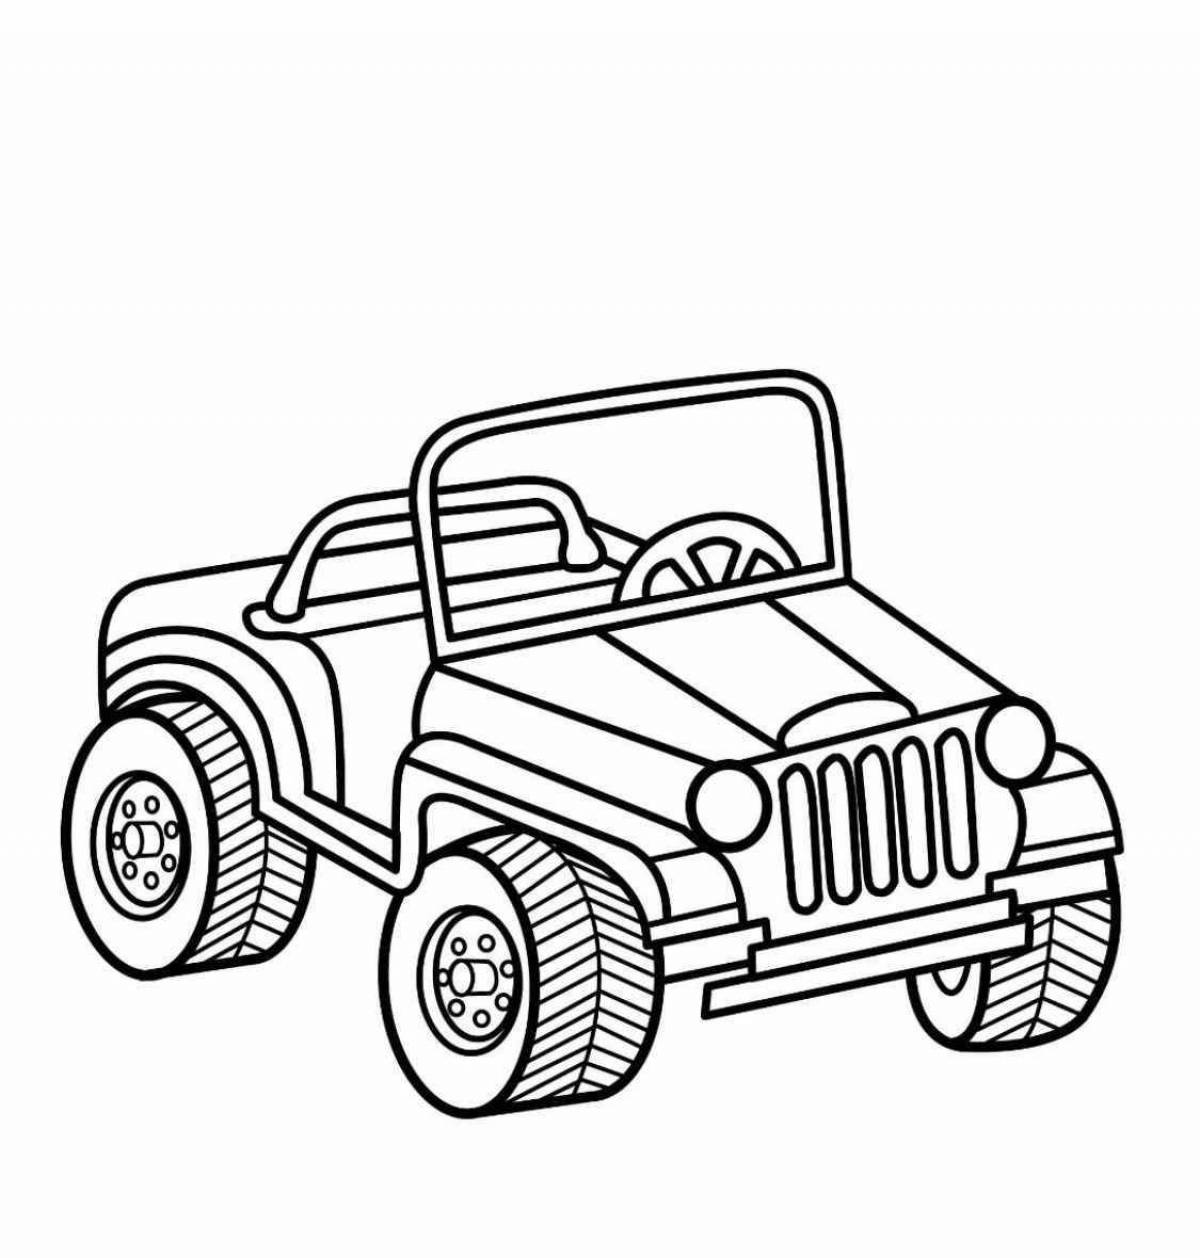 Intricate jeep coloring book